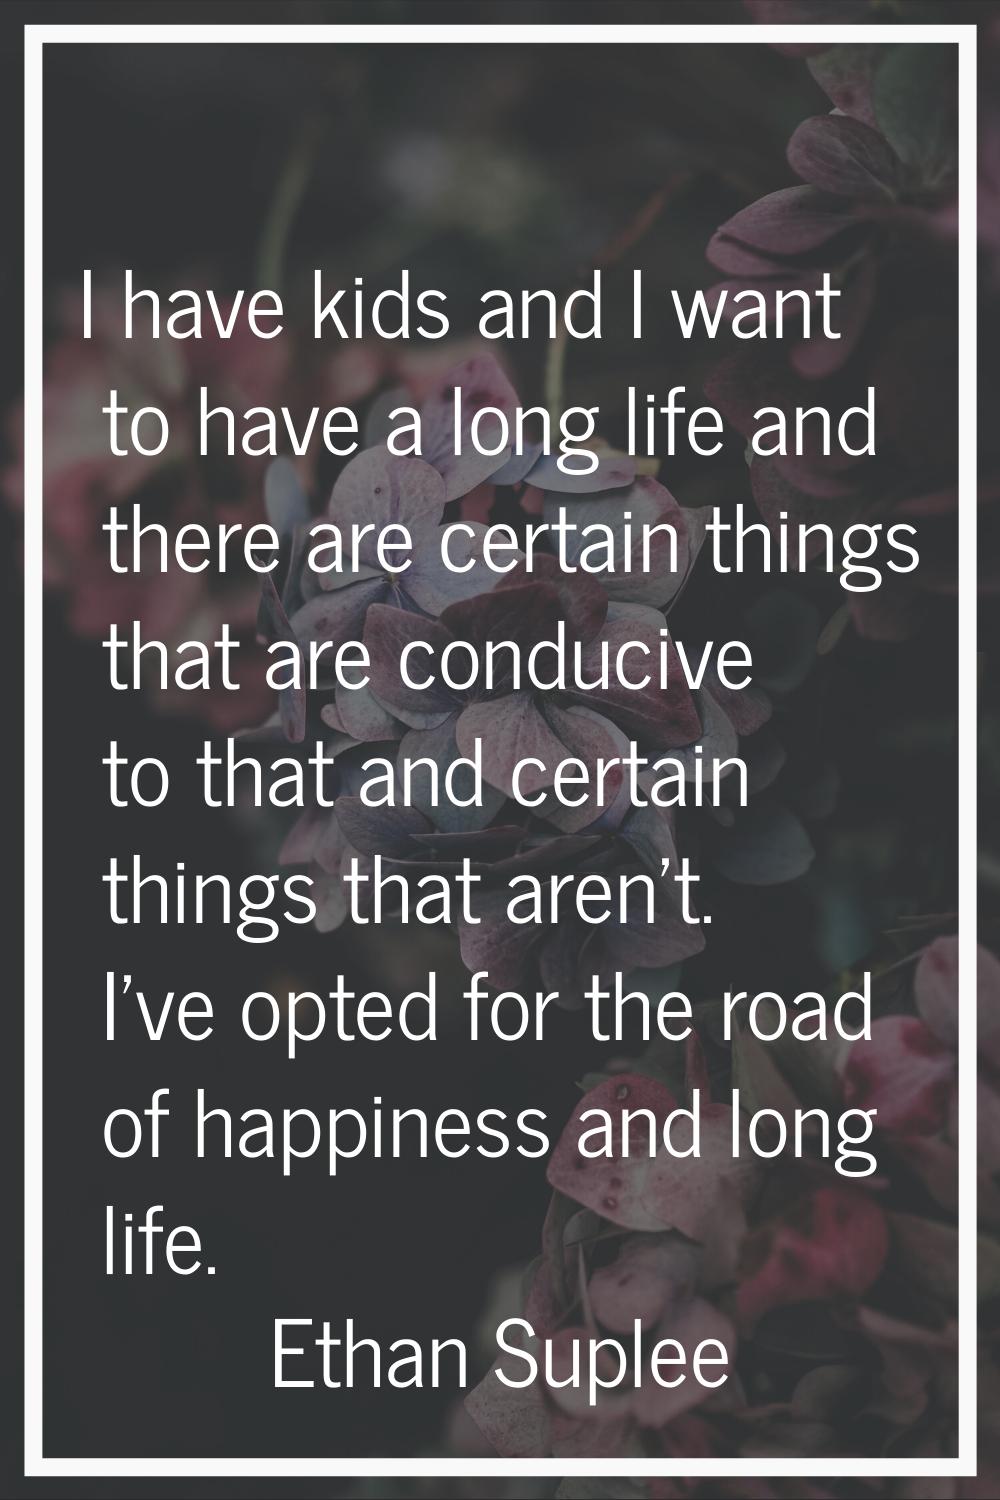 I have kids and I want to have a long life and there are certain things that are conducive to that 